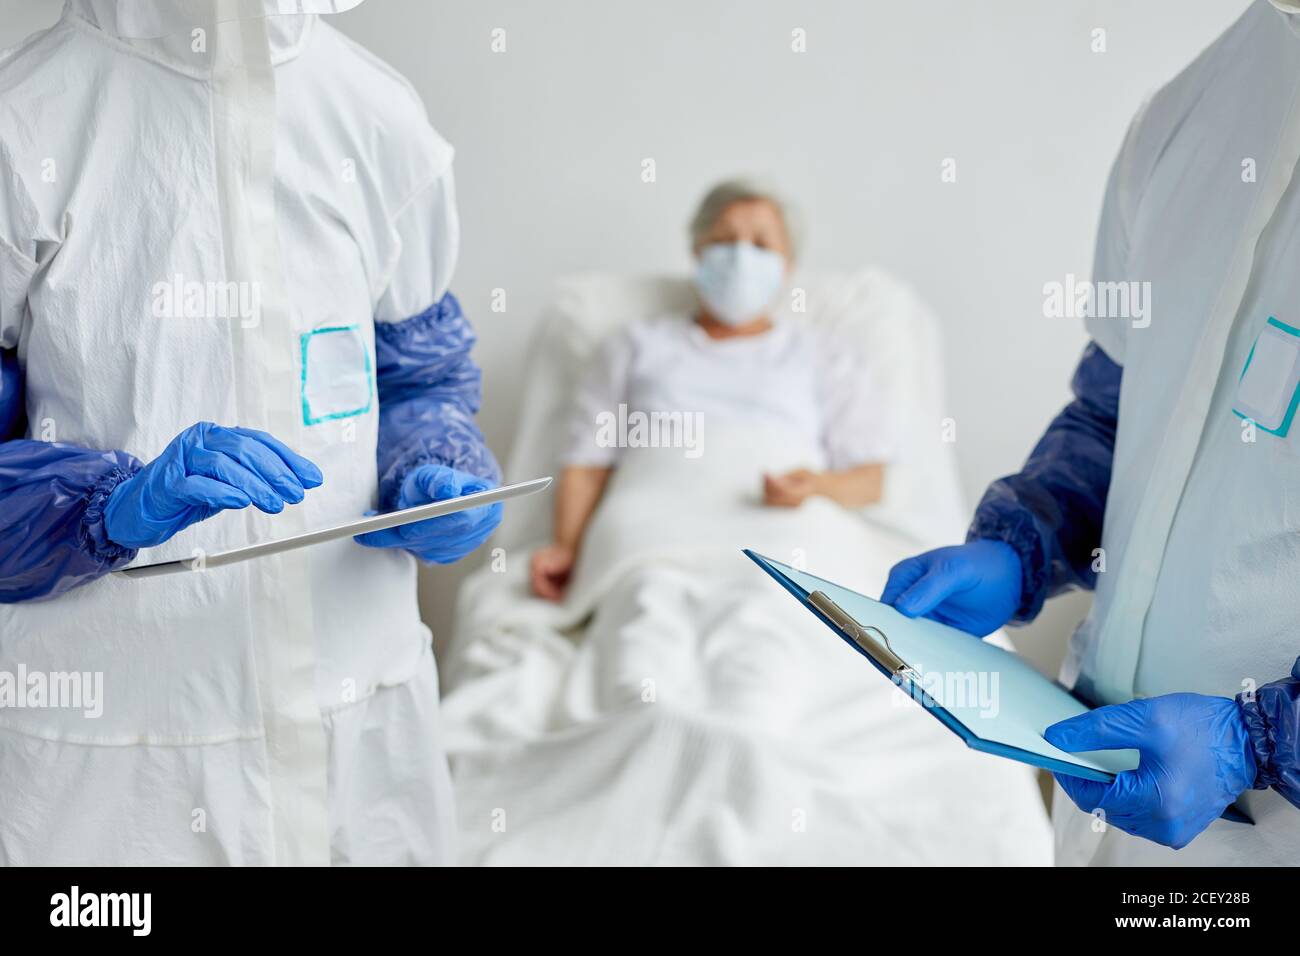 Two modern unrecognizable doctors wearing protective clothes standing in hospital ward with senior female patient on bed discussing something Stock Photo